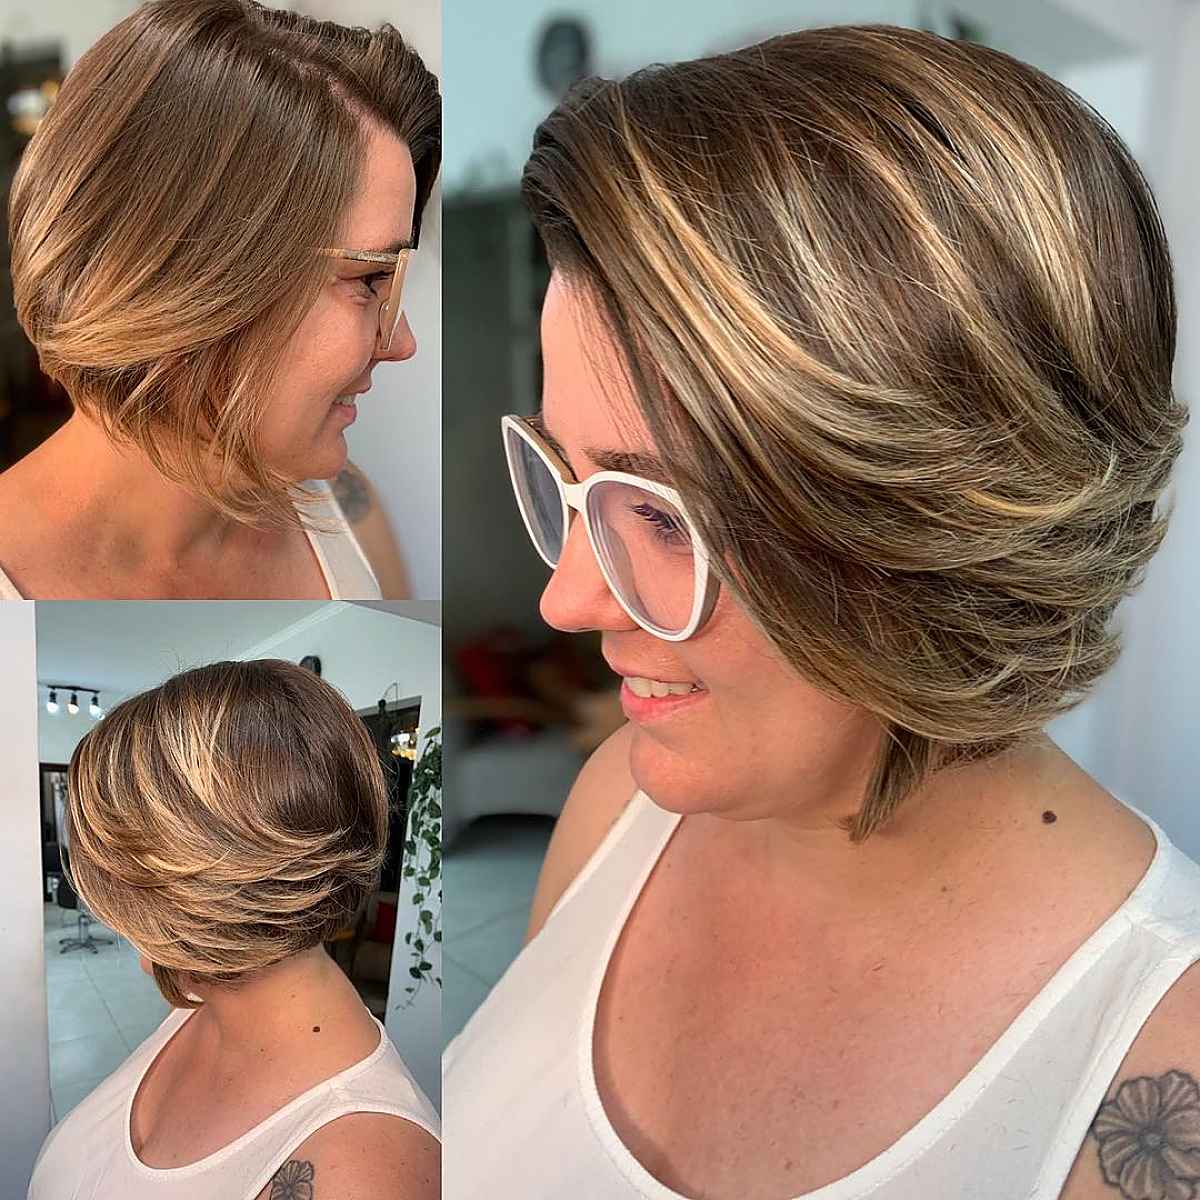 Chin-Length Feathered Bob with a Side Part